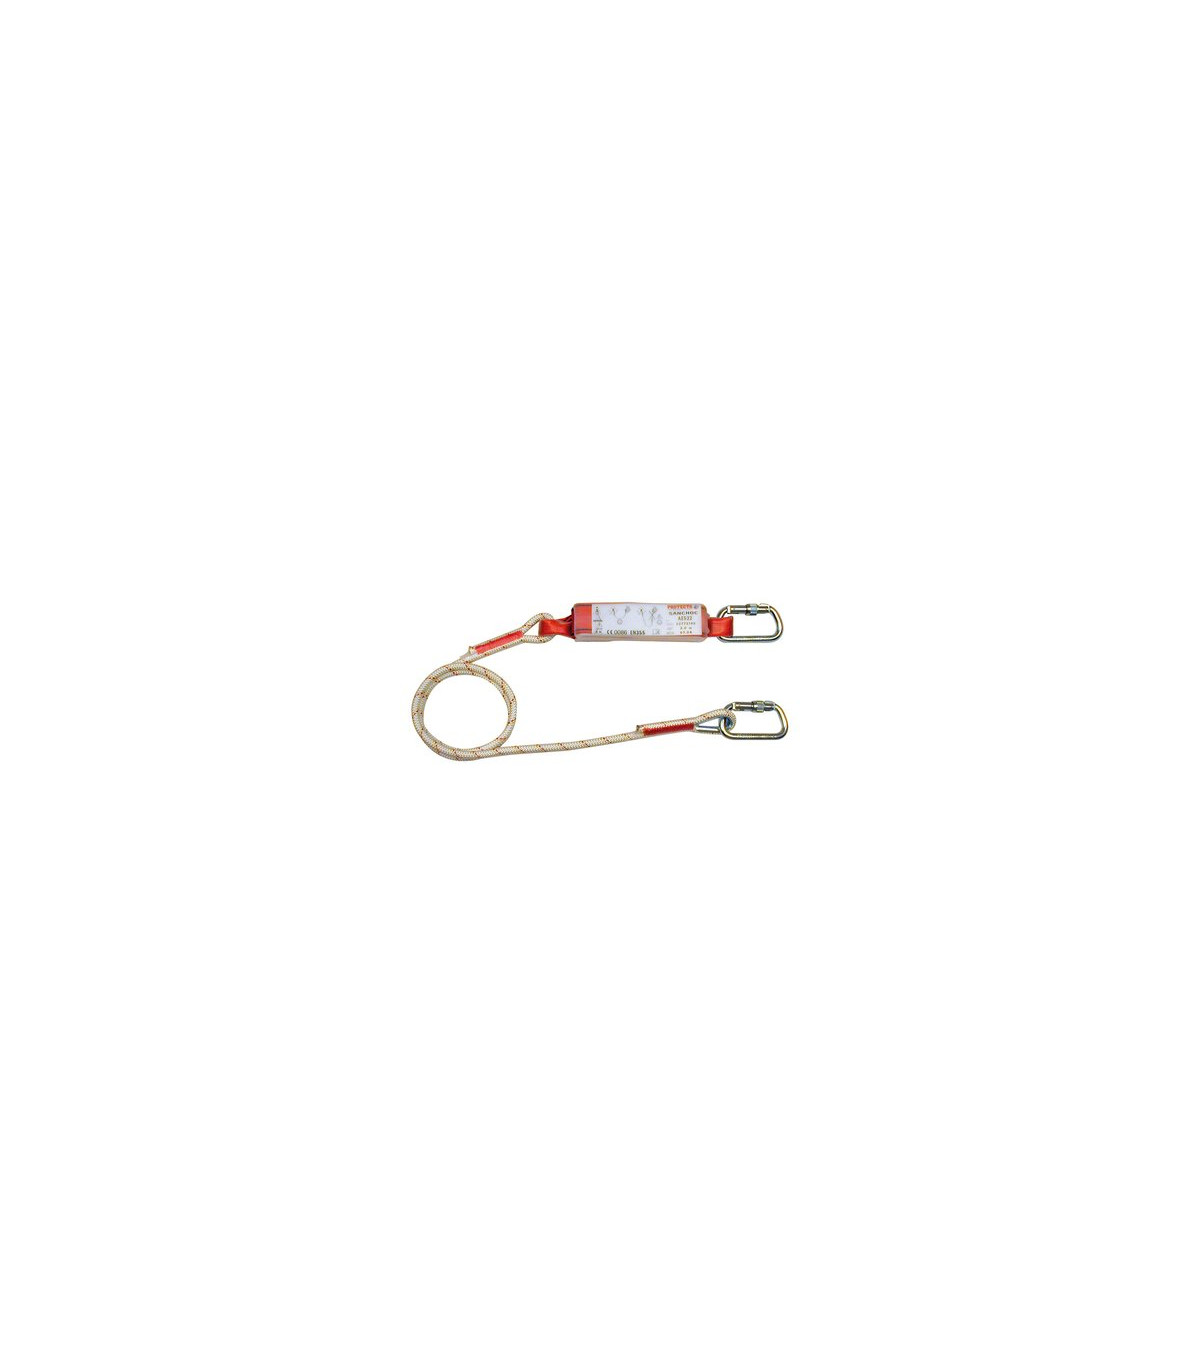 Sling with energy absorber, Kernmantle rope, single branch, 1.50 m 3M  Protect the Sanchoc AE522/1